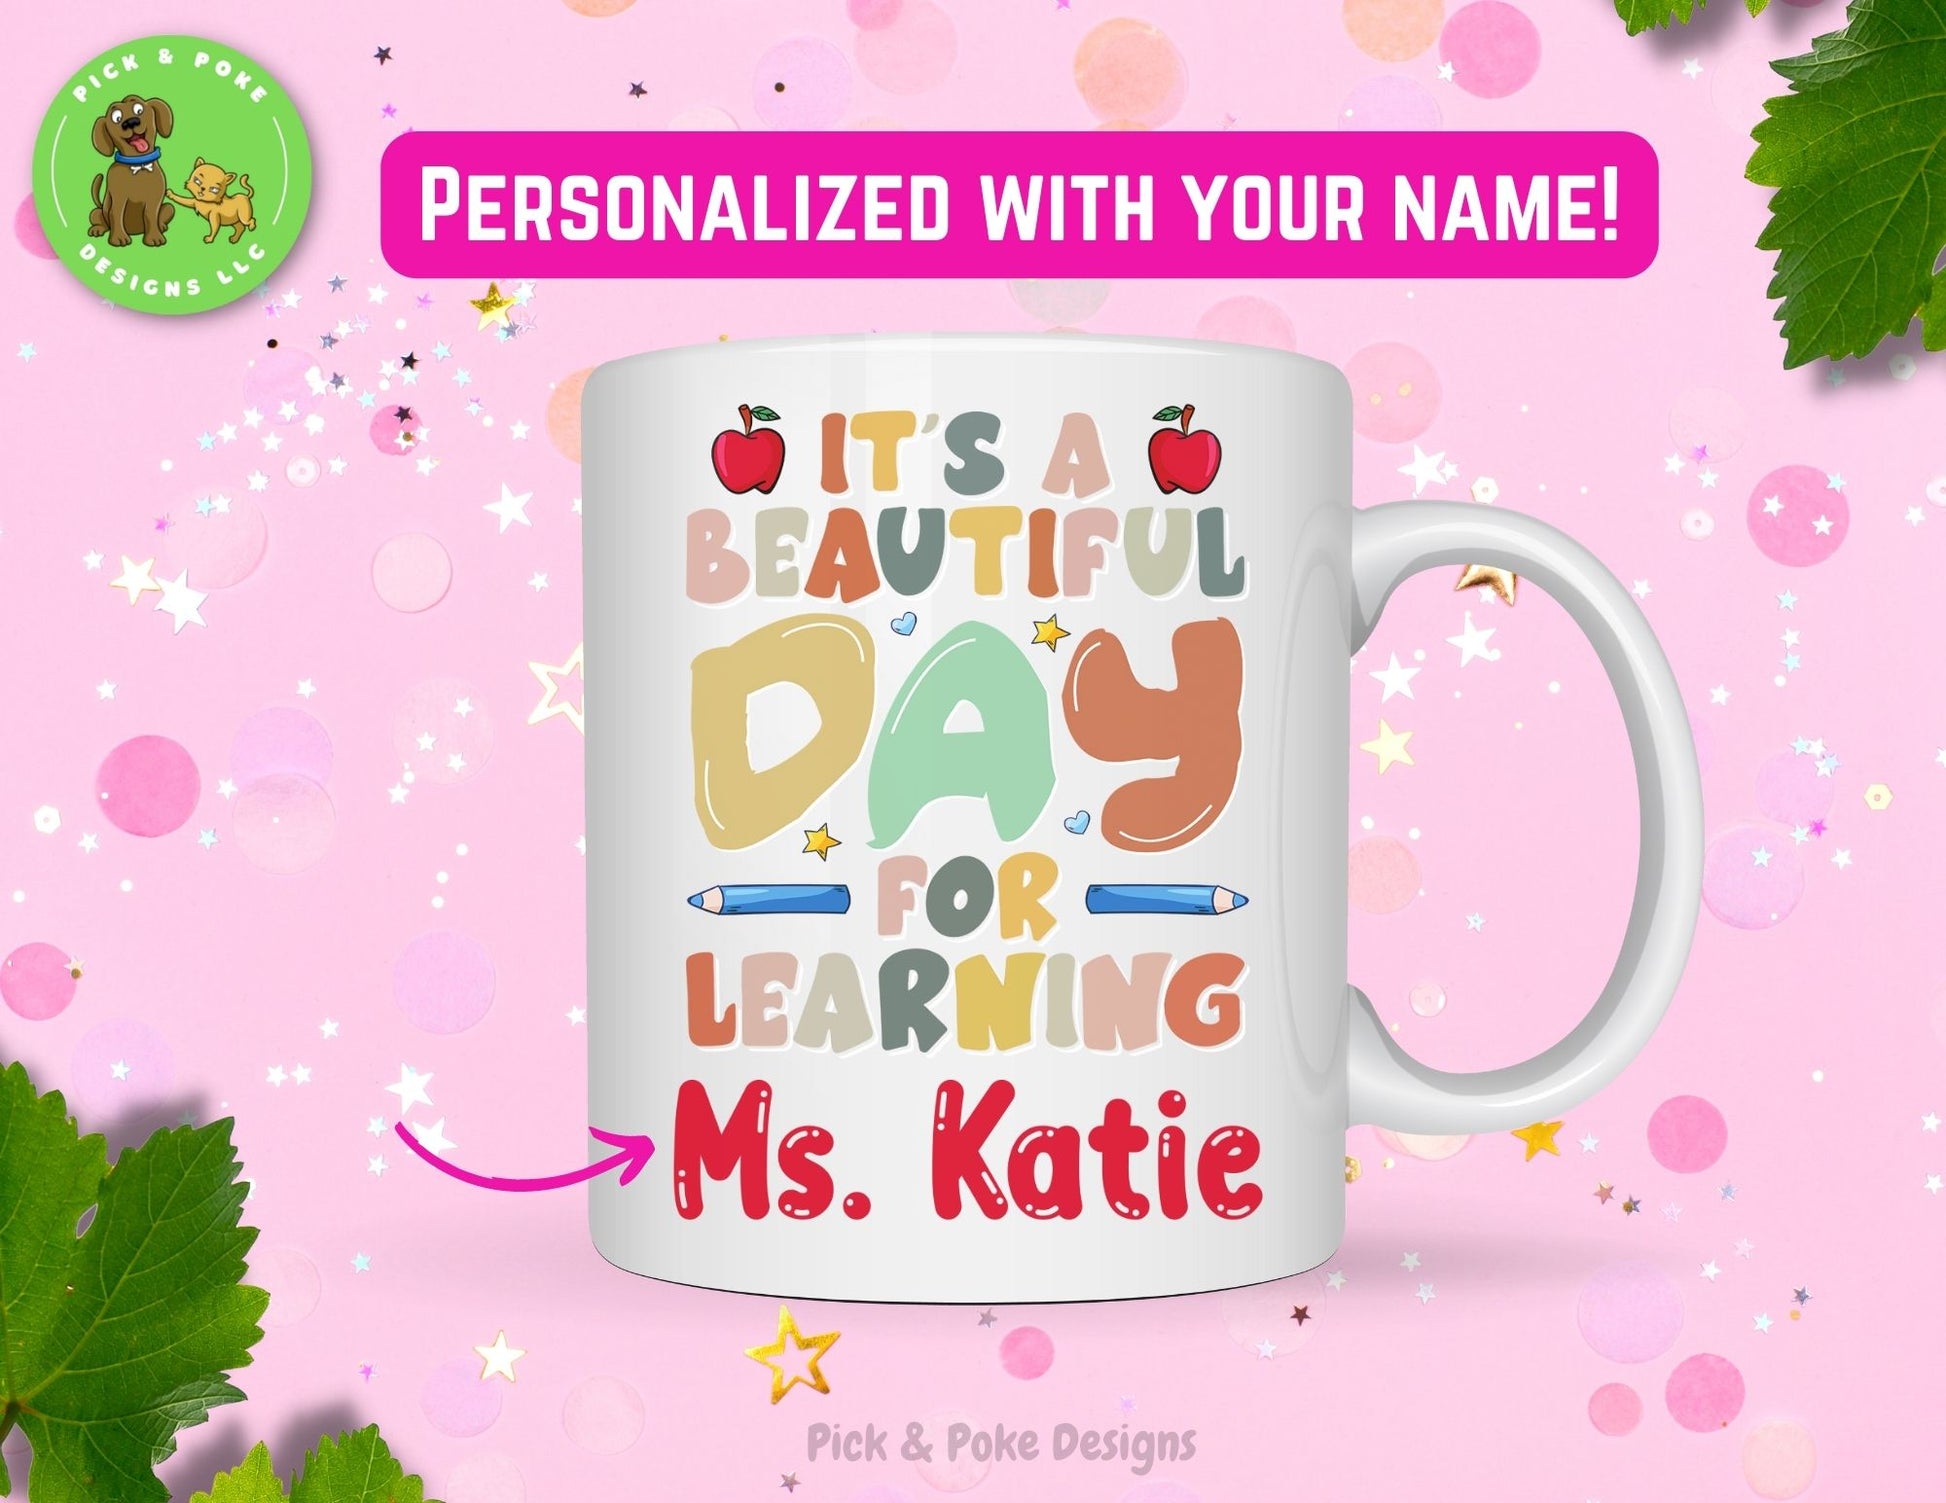 11oz It's a Beautiful Day for Learning Mug is personalized with teacher's name